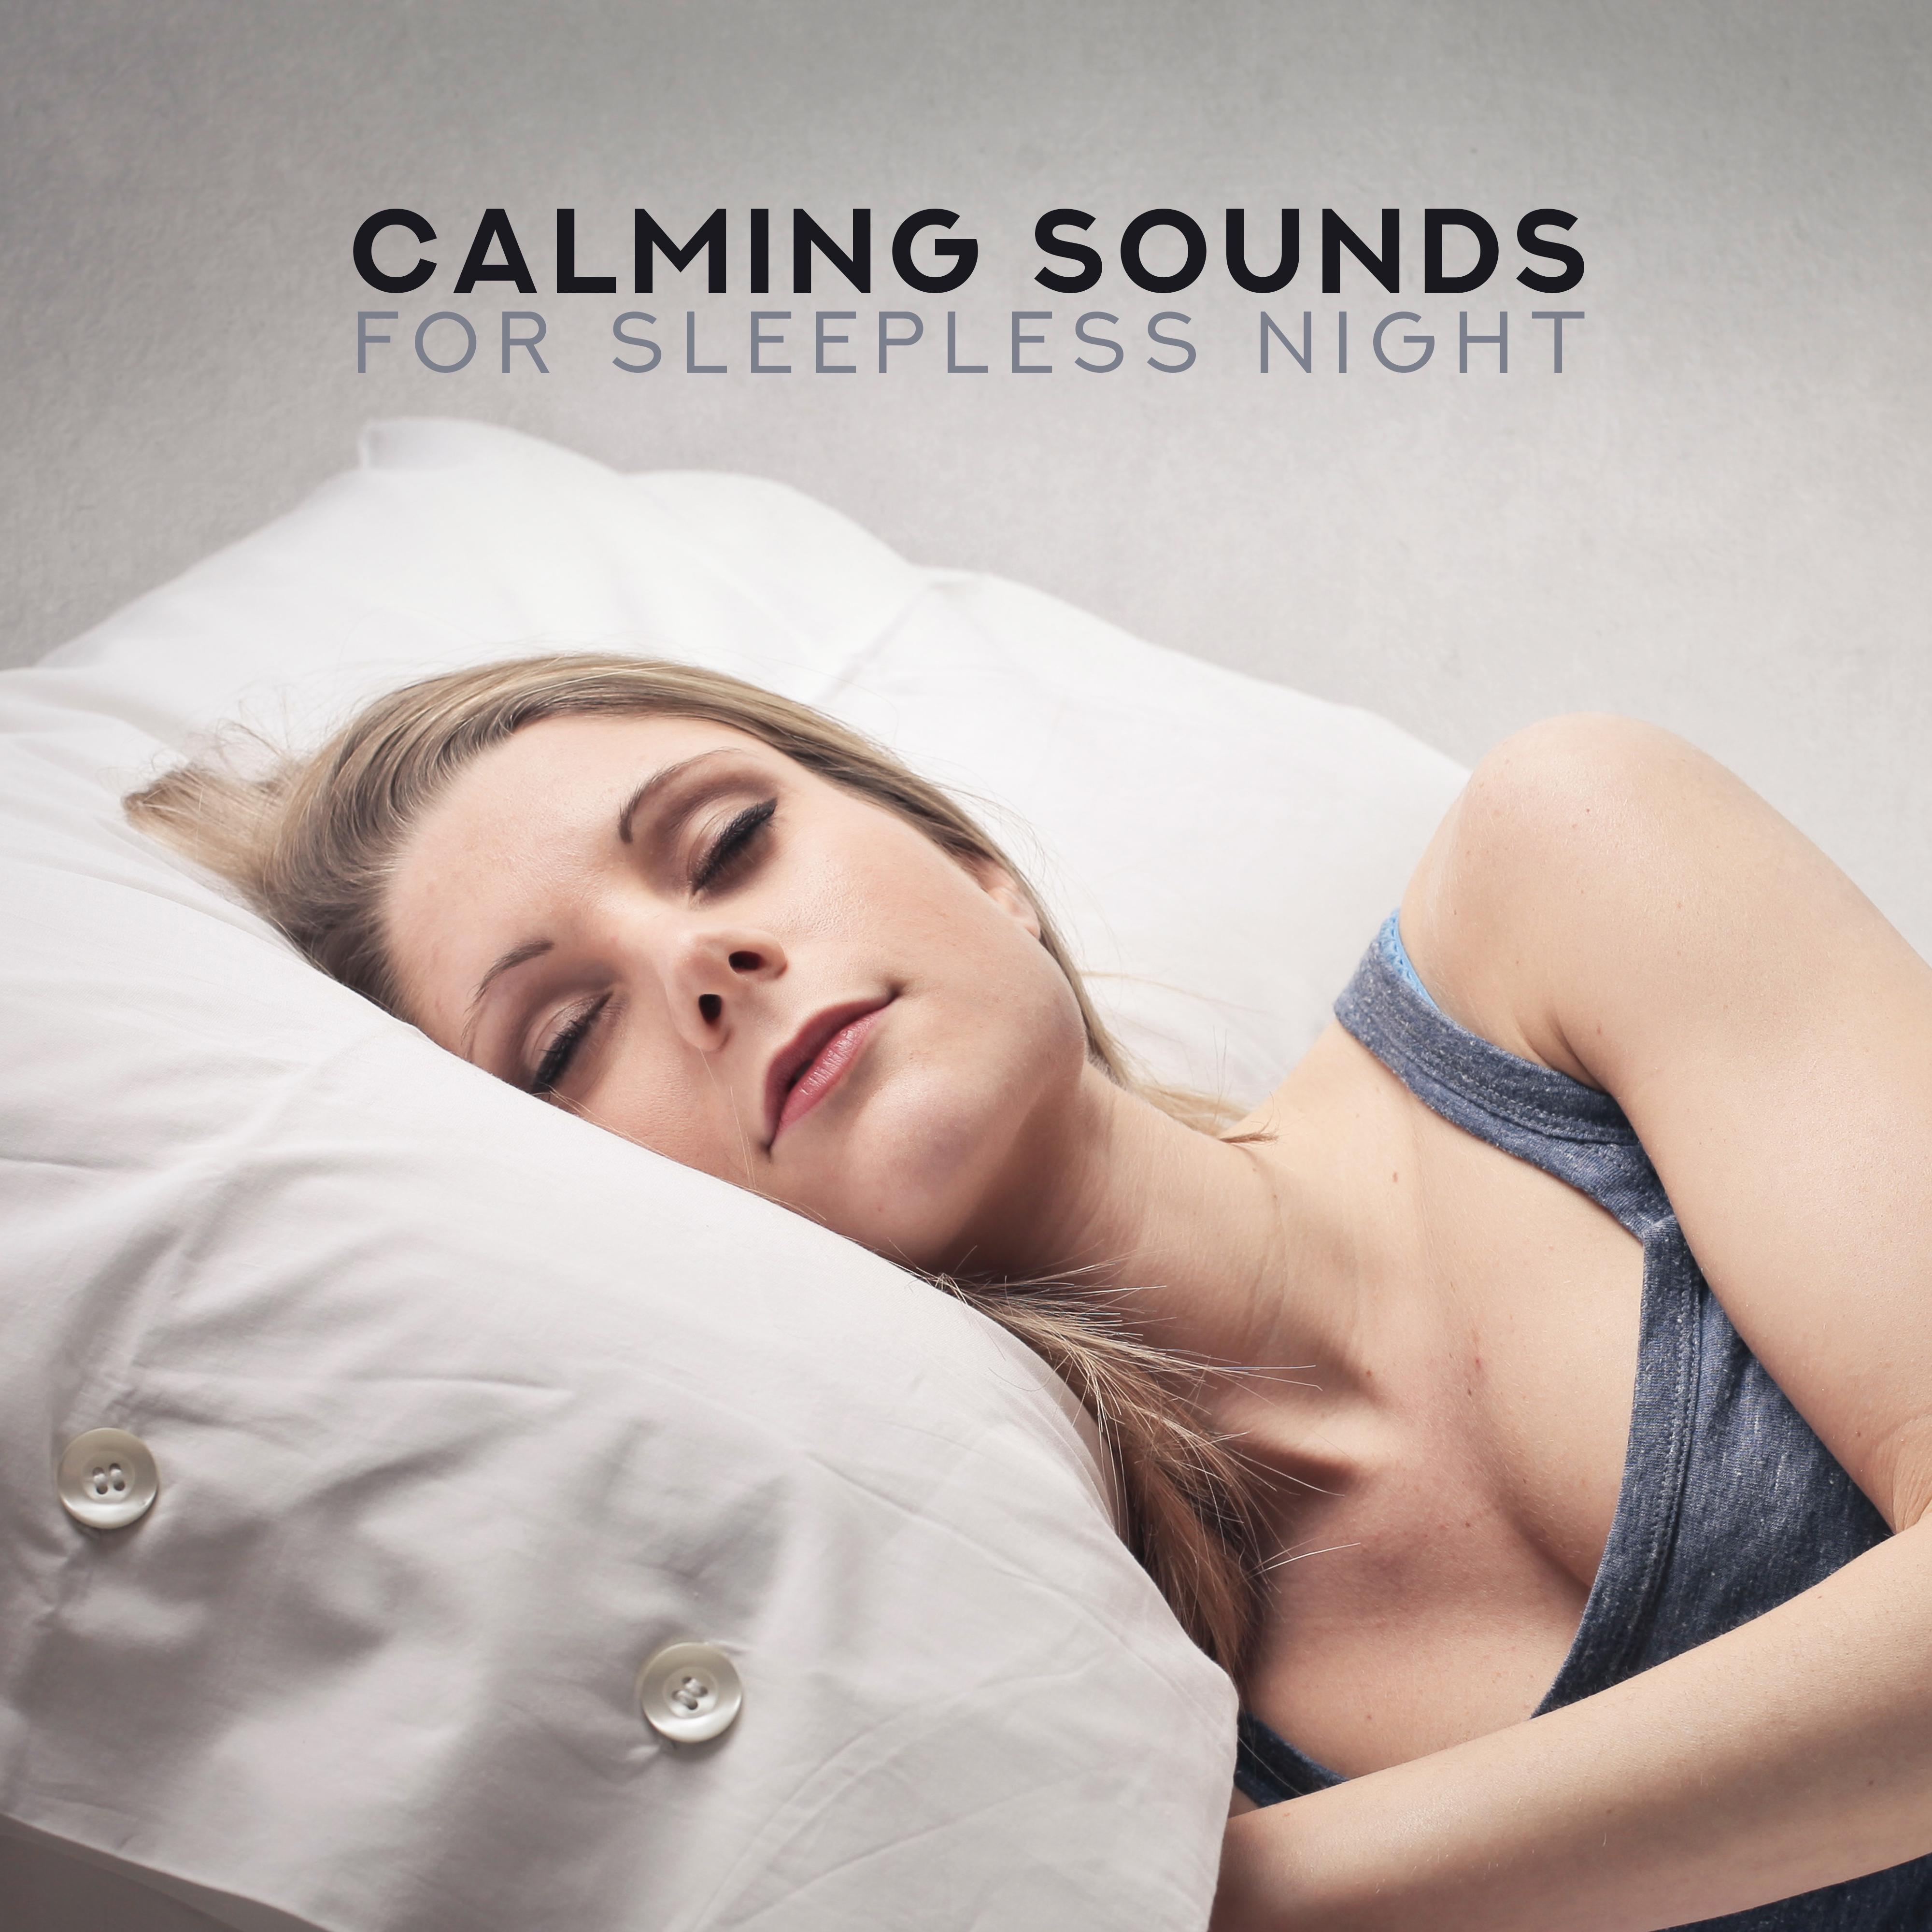 Calming Sounds for Sleepless Night: Cure for Insomnia, Healing Music for Deeper Sleep, Gentle Lullabies, Stress Relief, Calm Down, Ambient Chill, Zen, Lounge, Soft Sleep Songs